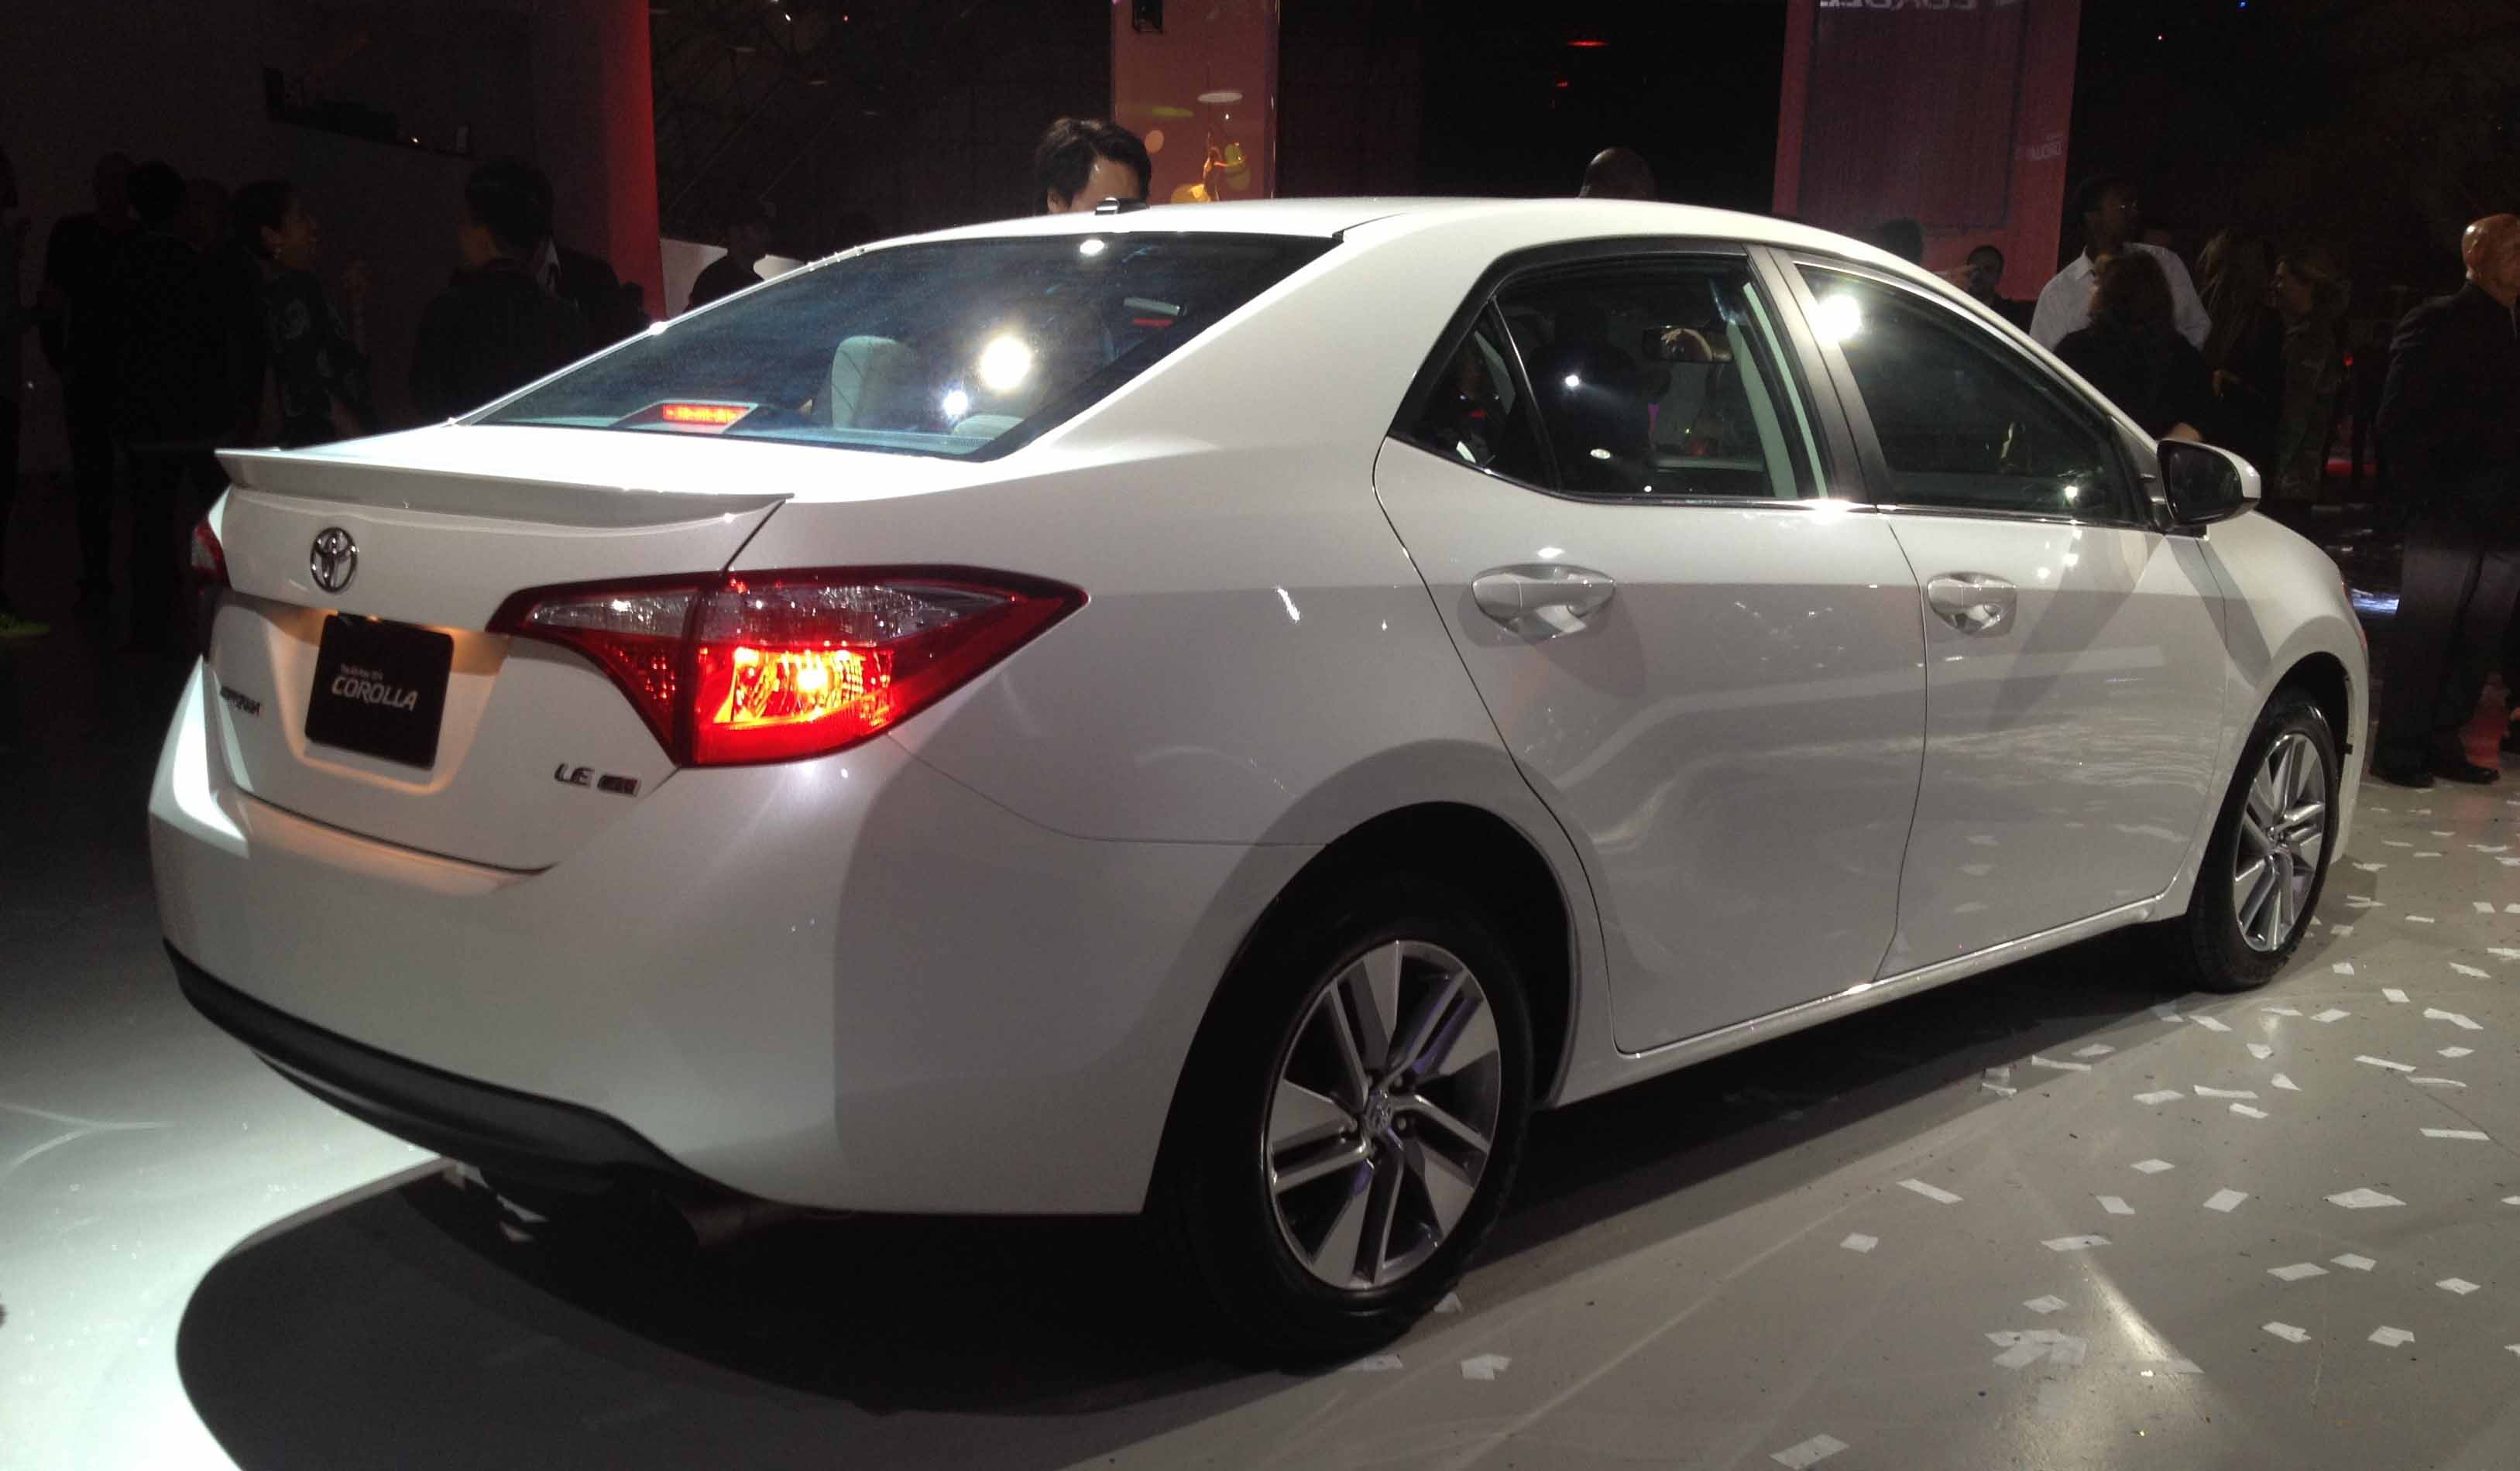 Toyota Corolla 2015 Best Hd Wallpapers New HD Wallpapers